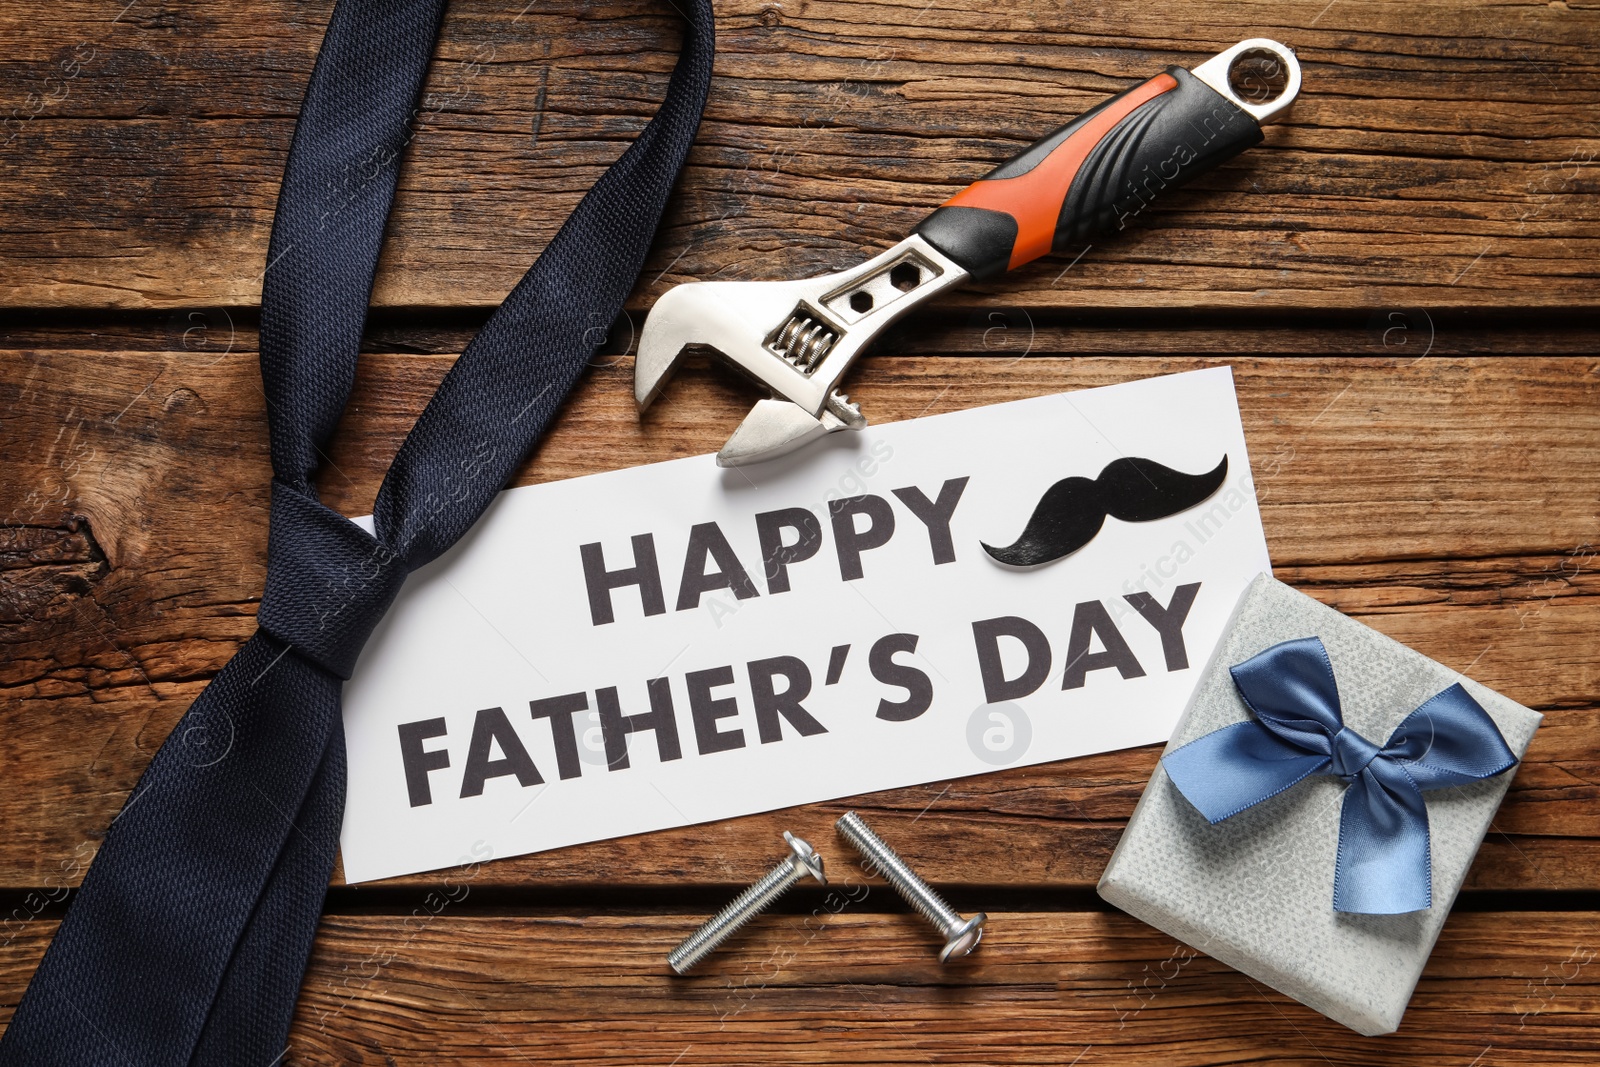 Photo of Card with phrase HAPPY FATHER'S DAY, tools, tie and gift box on wooden background, flat lay